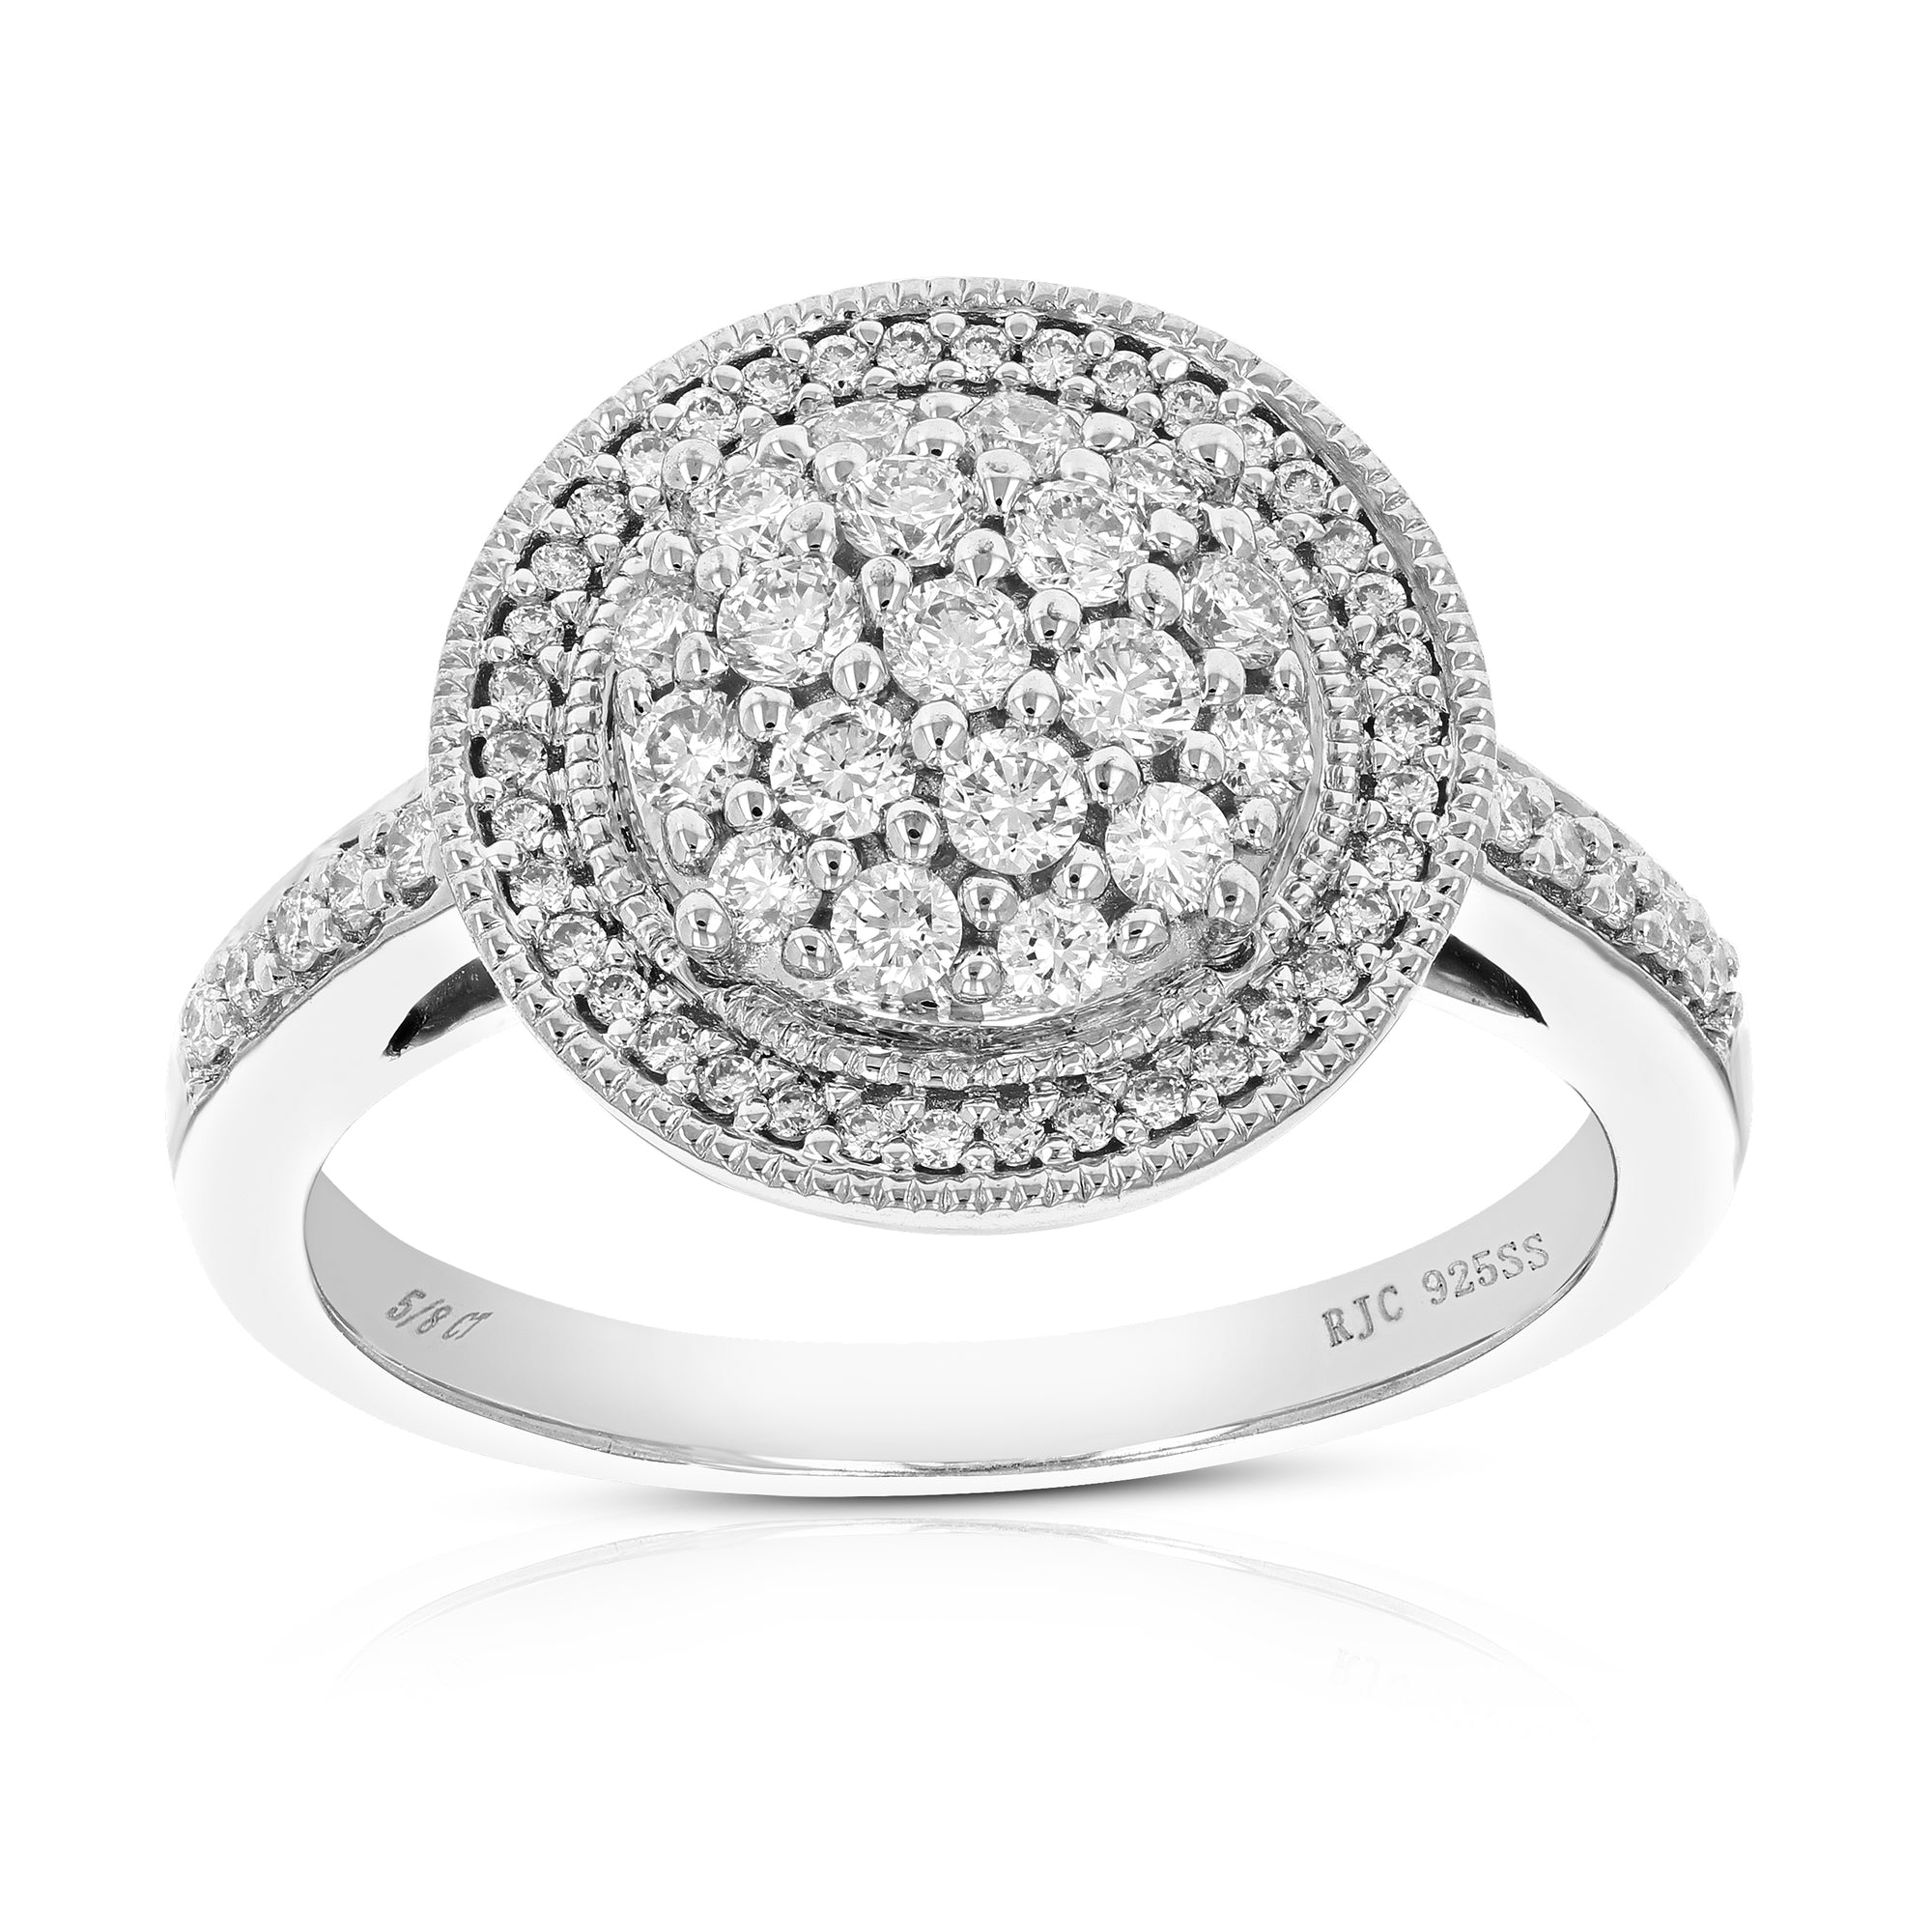 0.63 cttw Diamond Engagement Ring for Women, Round Lab Grown Diamond Ring in 0.925 Sterling Silver, Prong Setting, Size 6-8